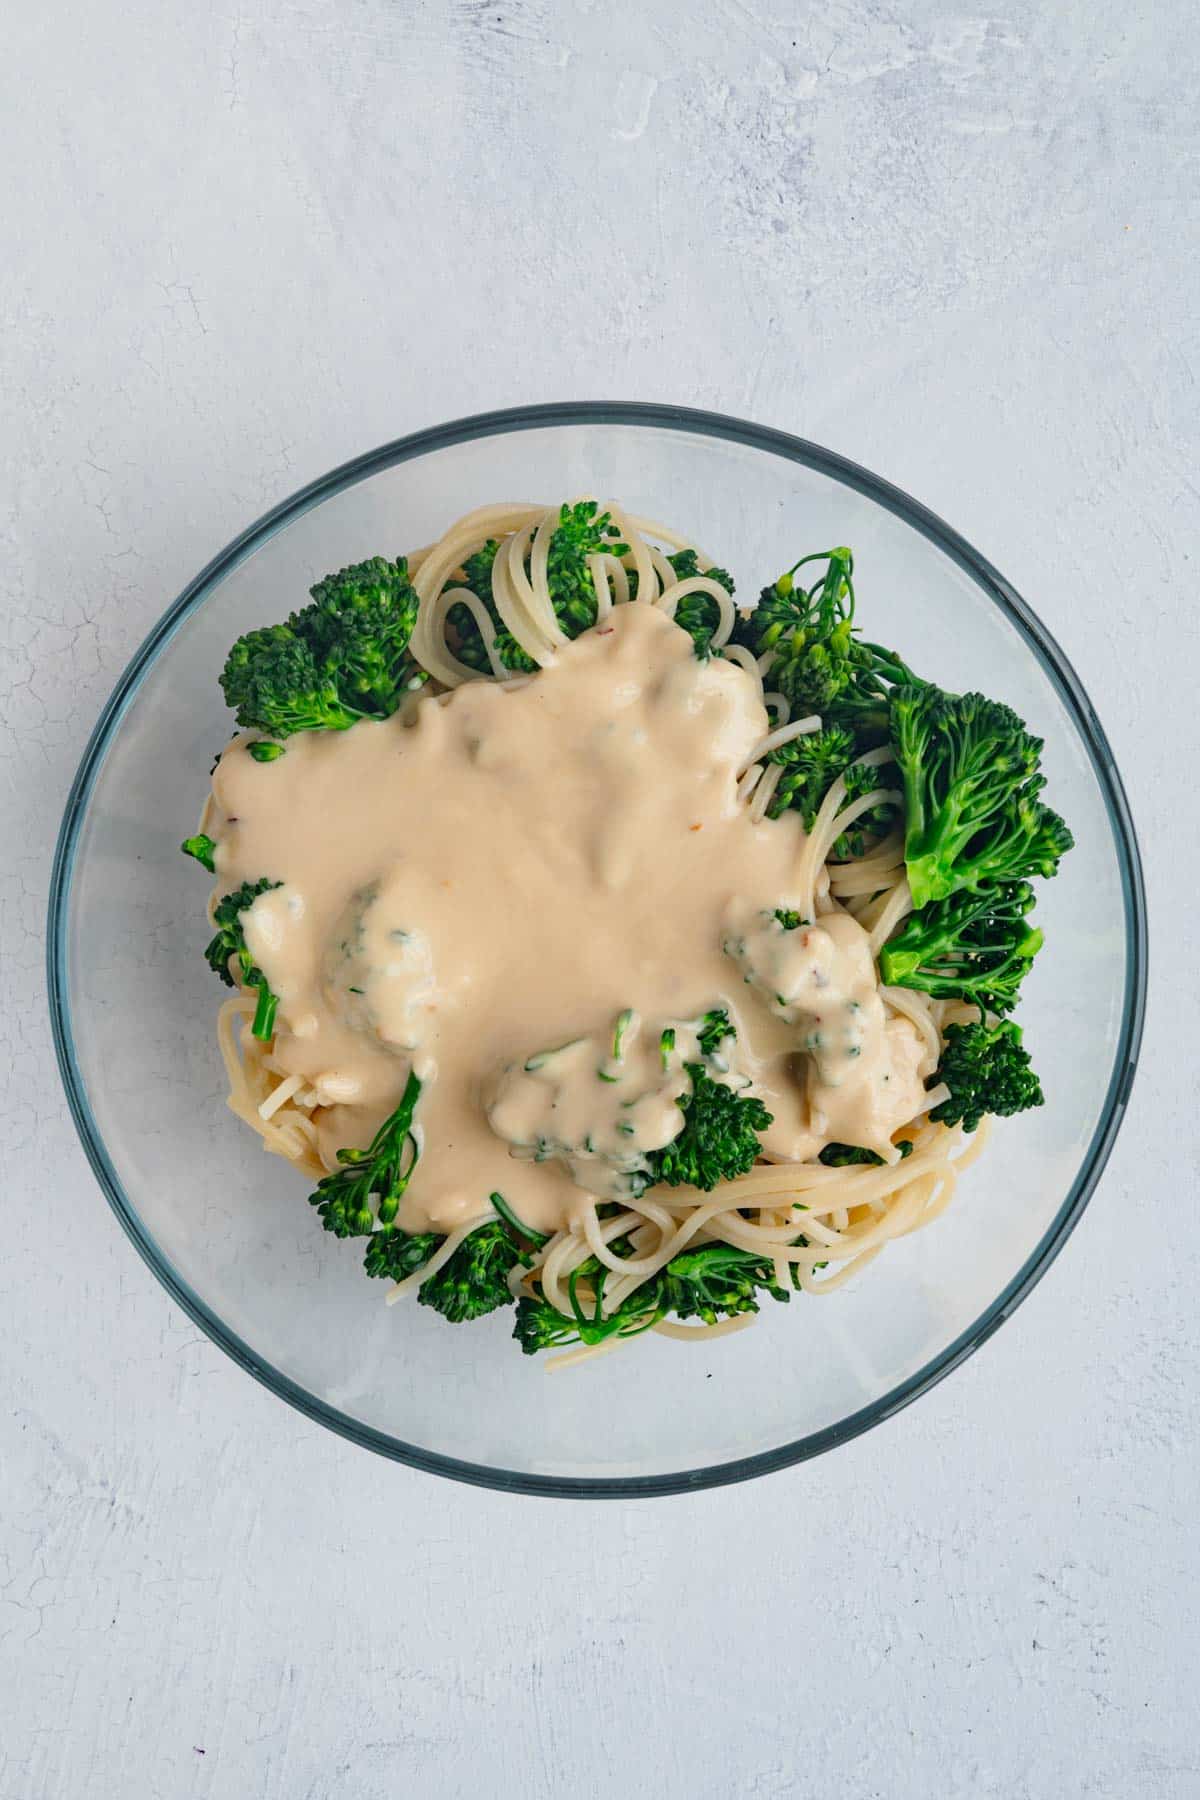 Pasta, noodles, and broccoli with tahini sauce in a glass bowl.